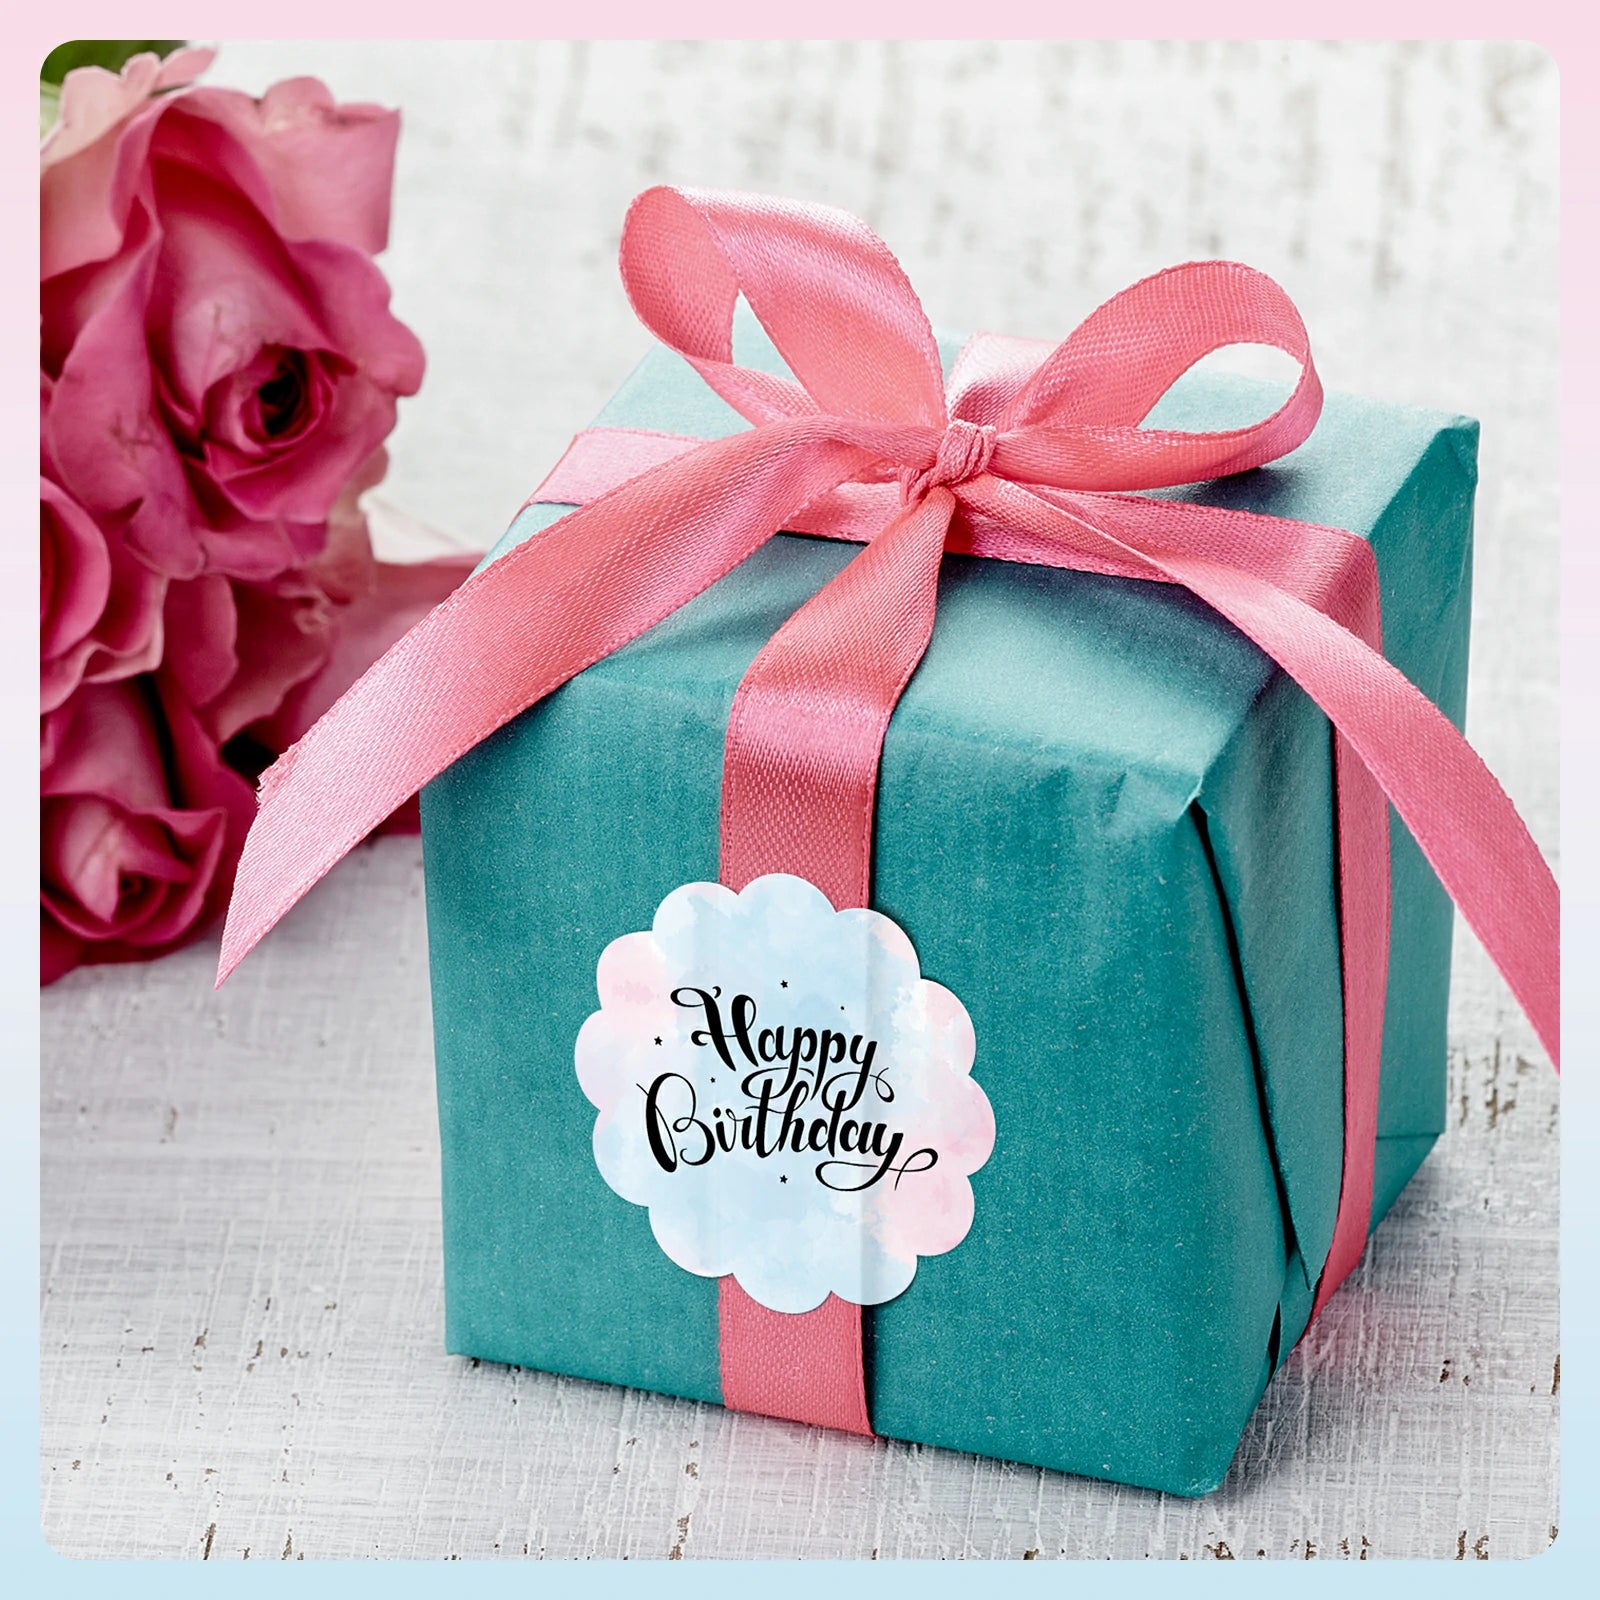 Flower-shaped labels are perfect for DIY printed stickers, making them an excellent choice for personalizing birthday gift boxes.